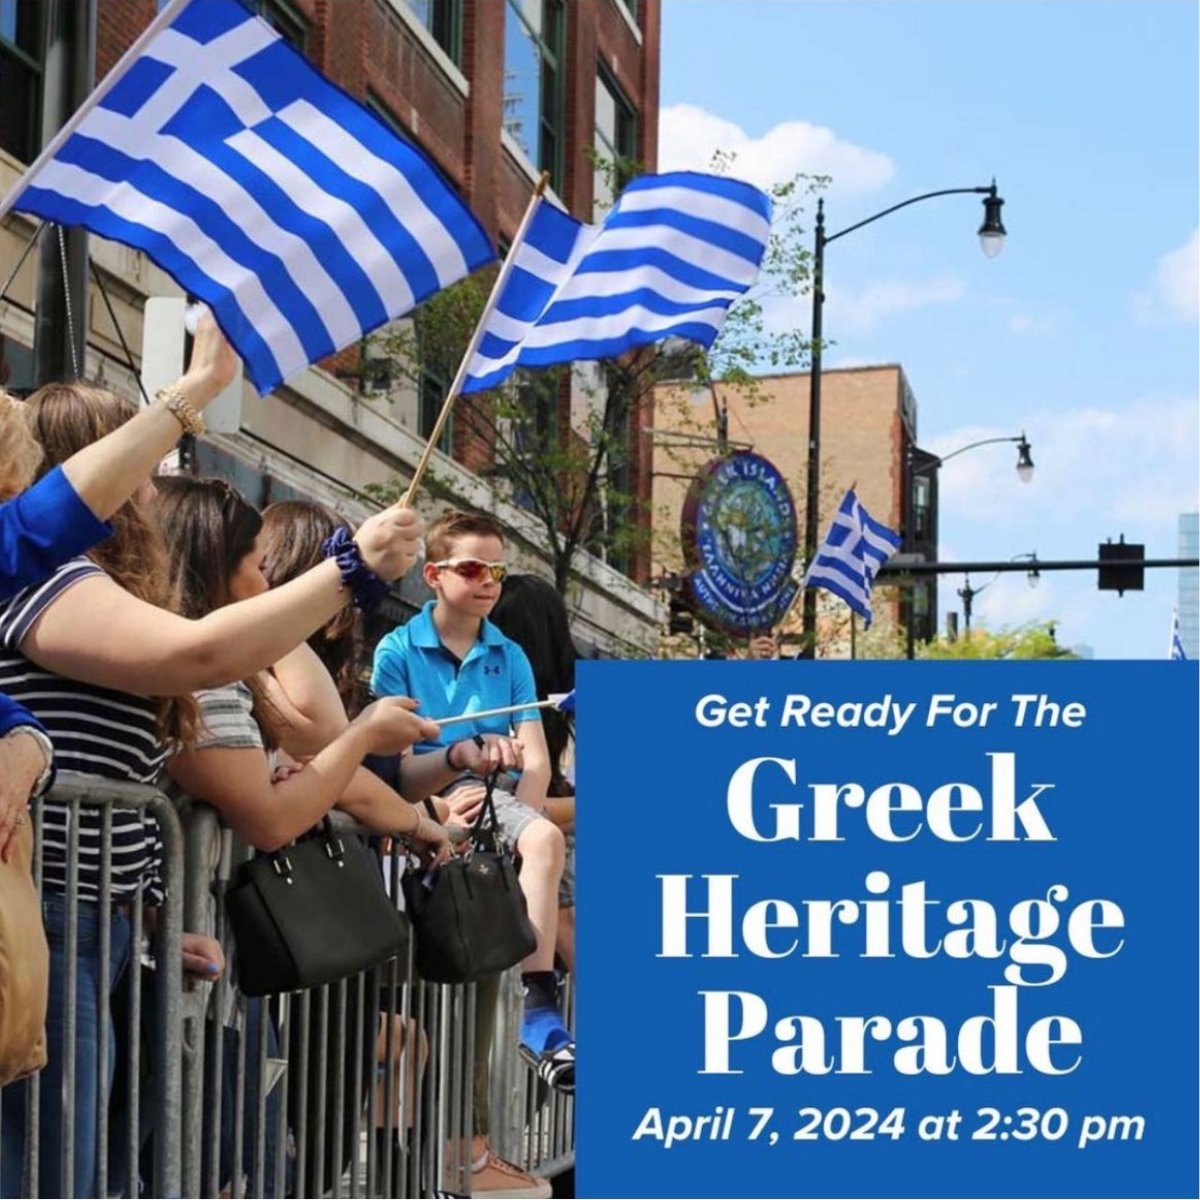 I am greatly looking forward to being with @MetNathanael and the @EnosisOfficial this weekend for the Chicago Greek Independence Day Parade! Please join us at Annunciation Cathedral on Sunday morning and in Greektown on Halsted Street in the afternoon to celebrate together!